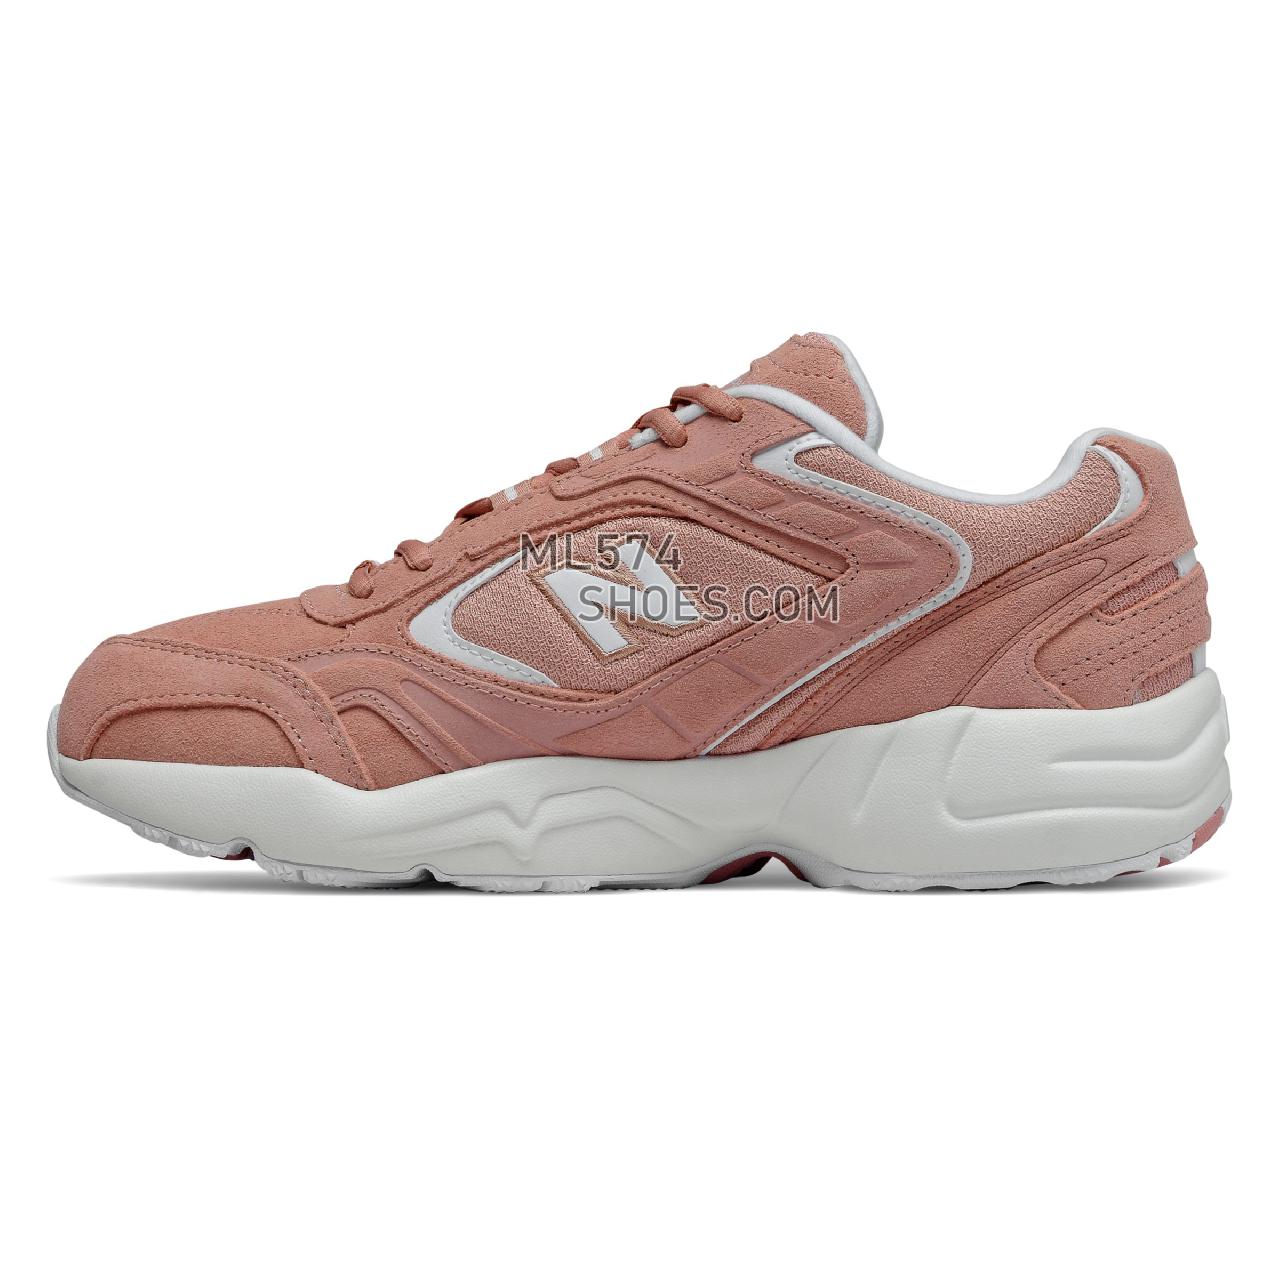 New Balance 452 - Men's 452 Training - Faded Cedar with Reflection and White - MX452SB